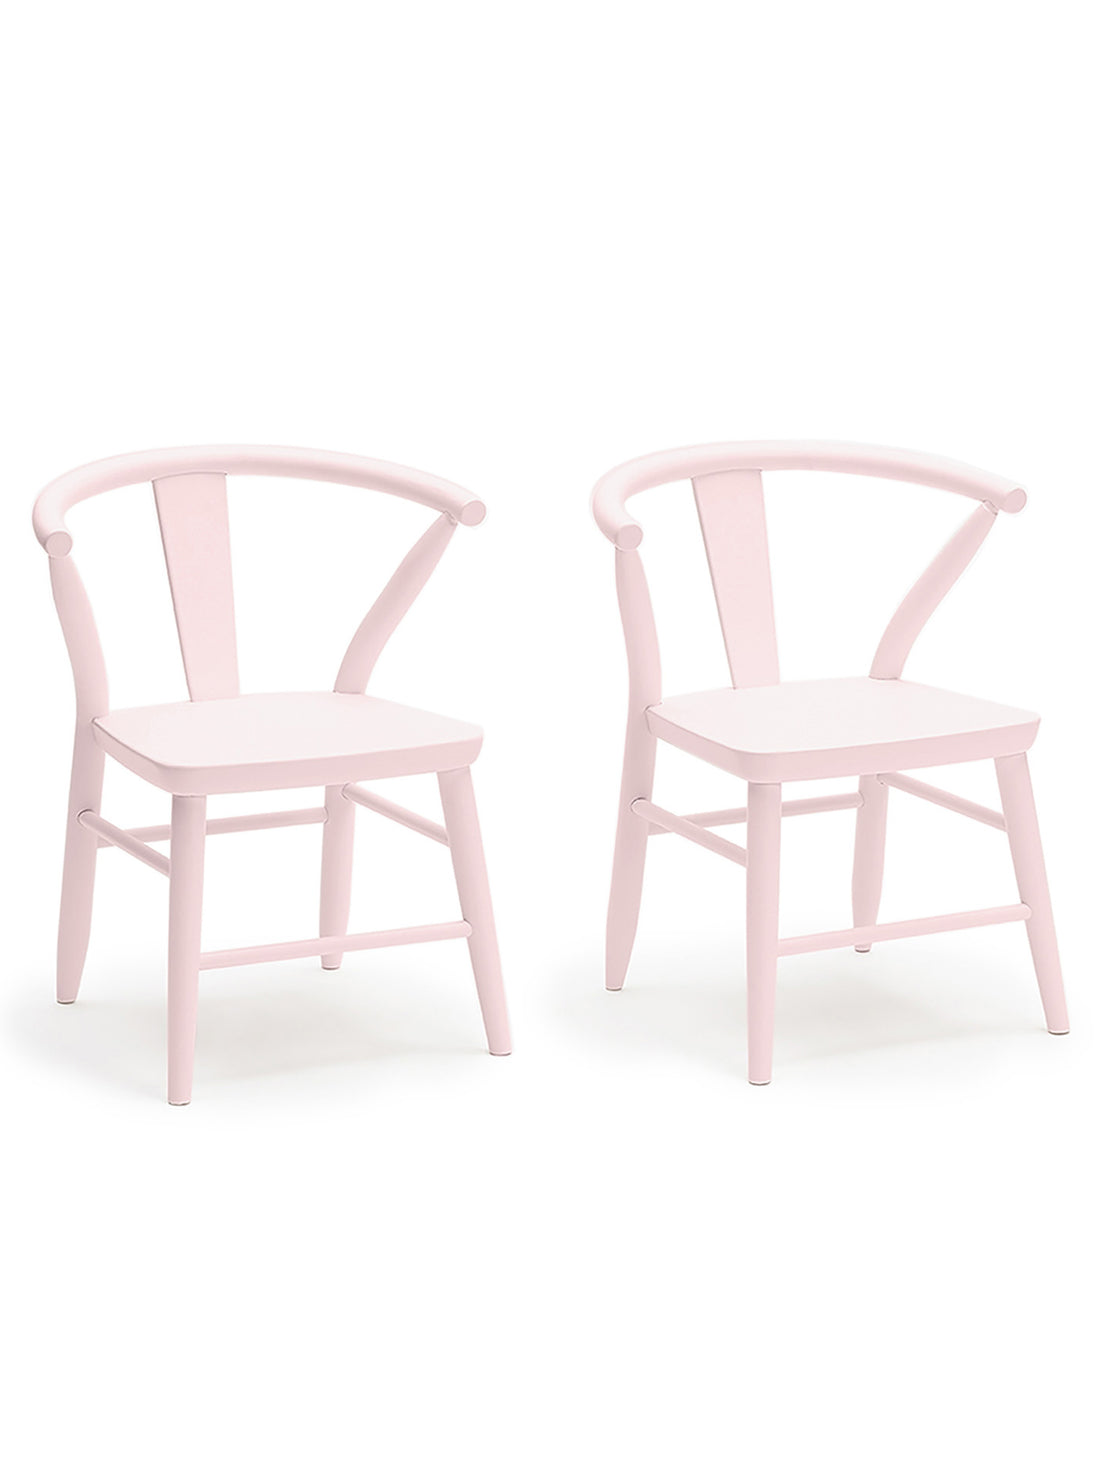 CRESCENT CHAIR (Pair), DUSTY ROSE